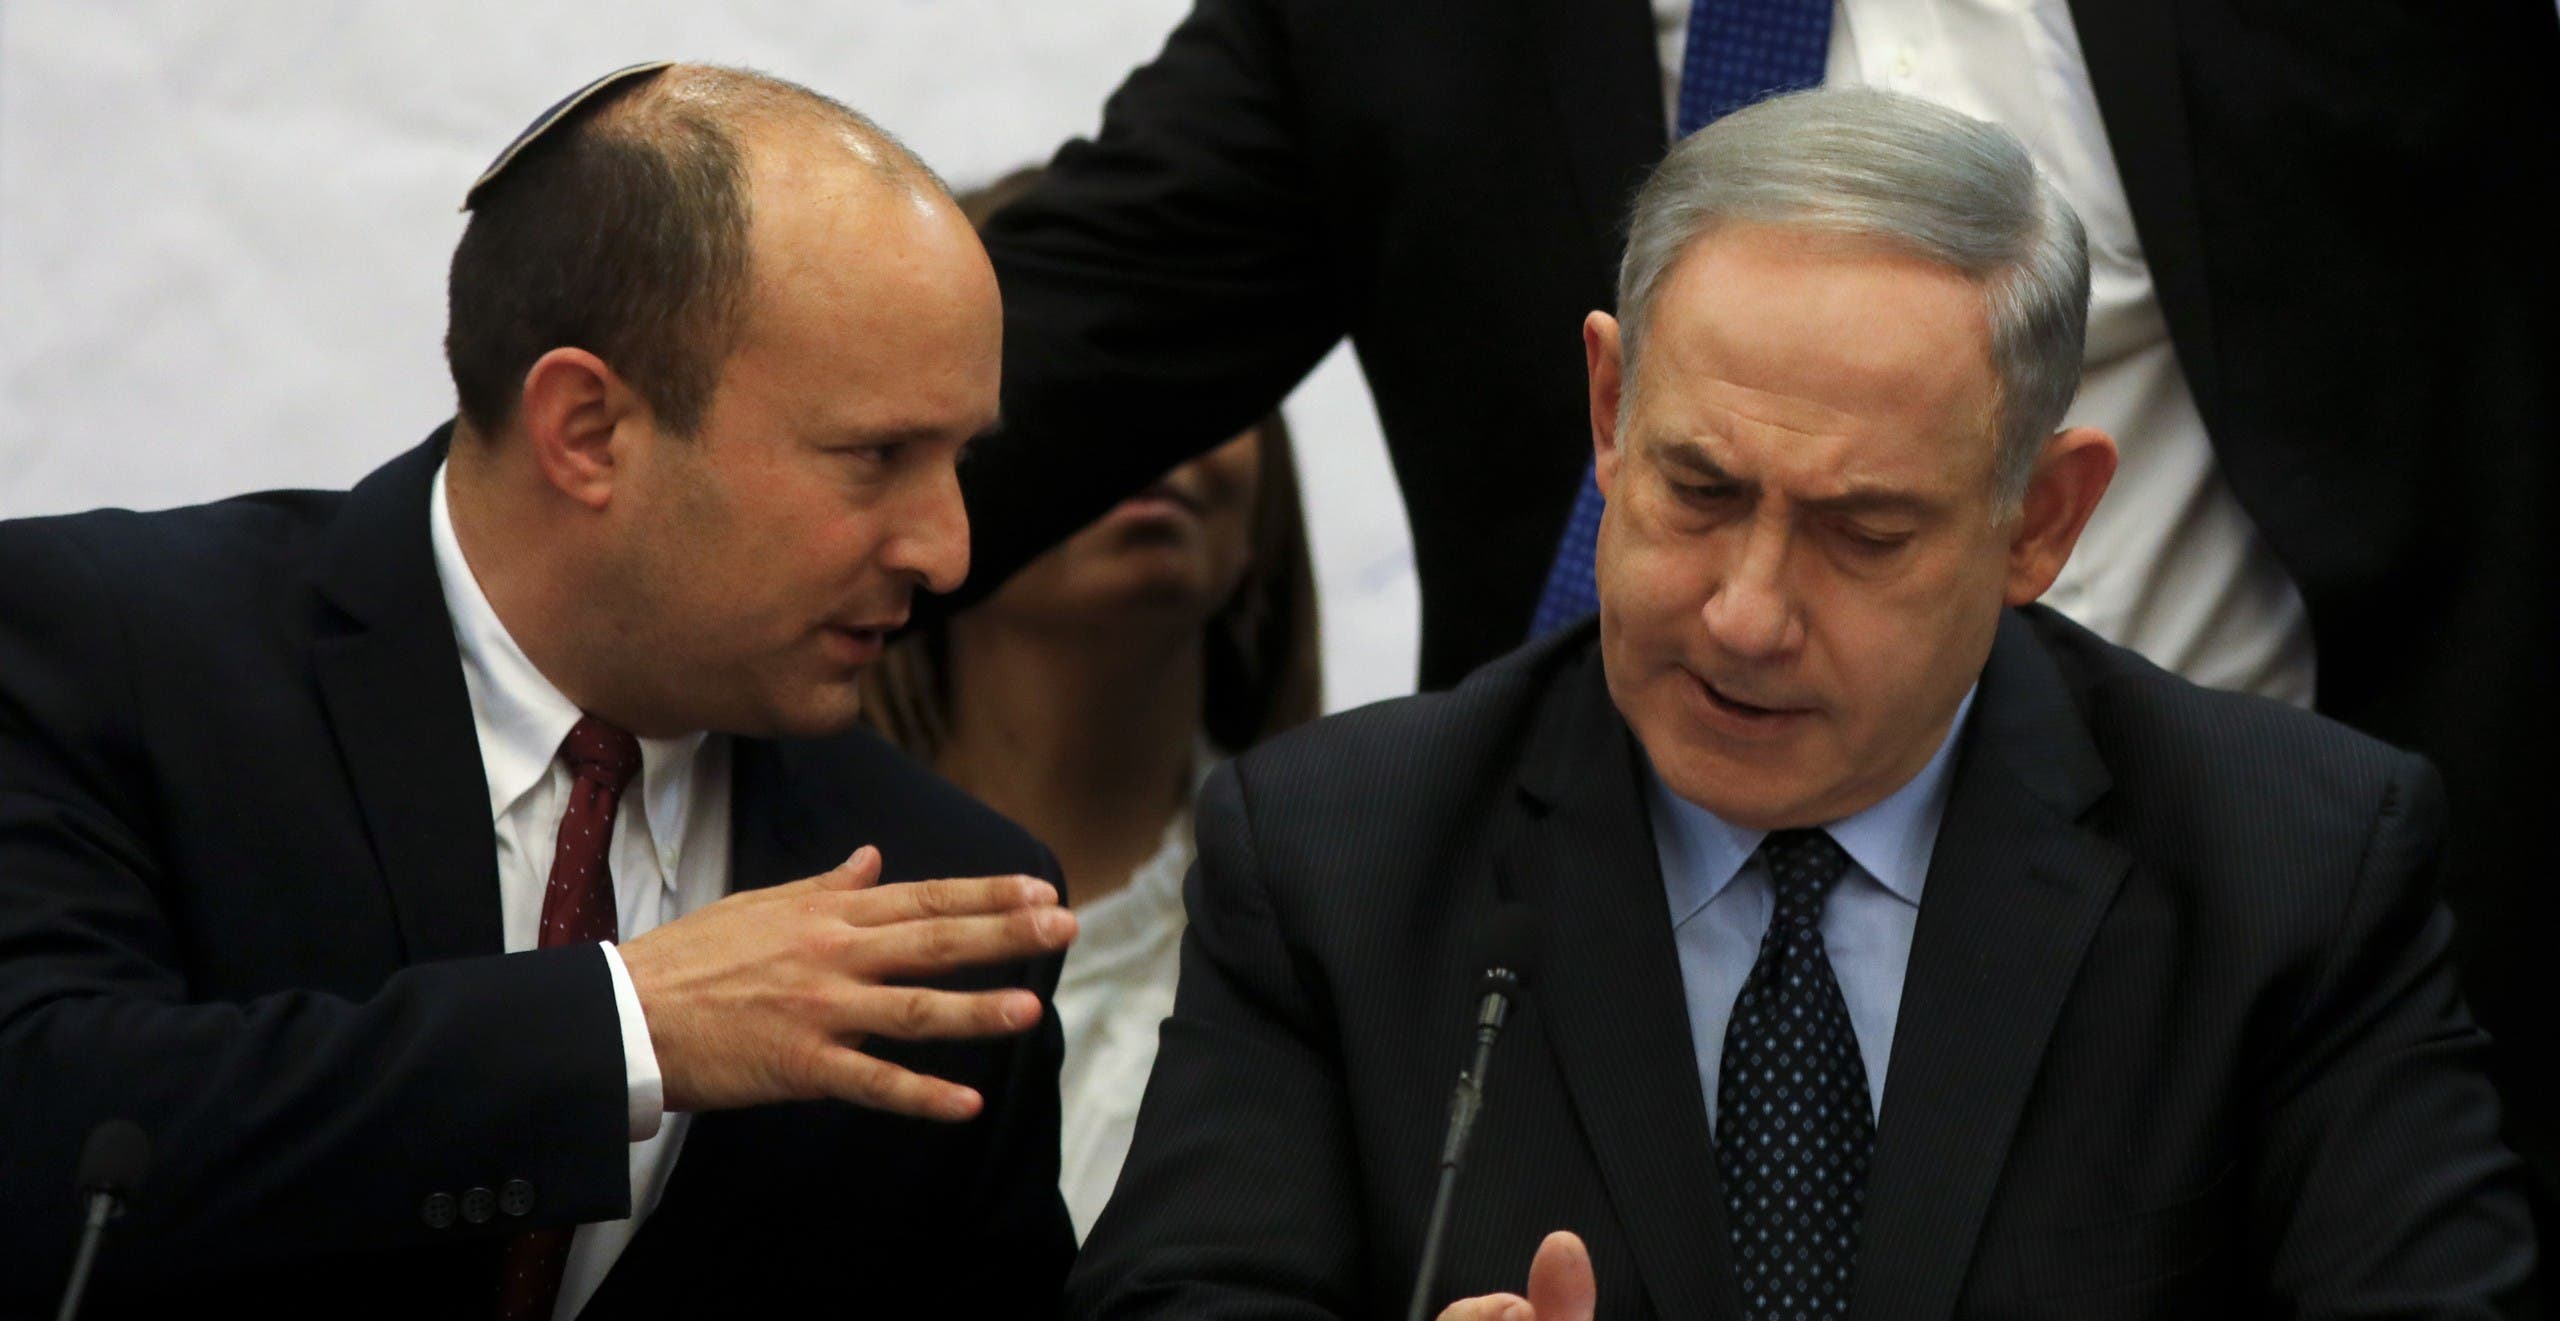 A file photo shows then Prime Minister Benjamin Netanyahu (R) and Defense Minister Naftali Bennett, attend a meeting at the Knesset (parliament) in Jerusalem, on March 4, 2020. (AFP)